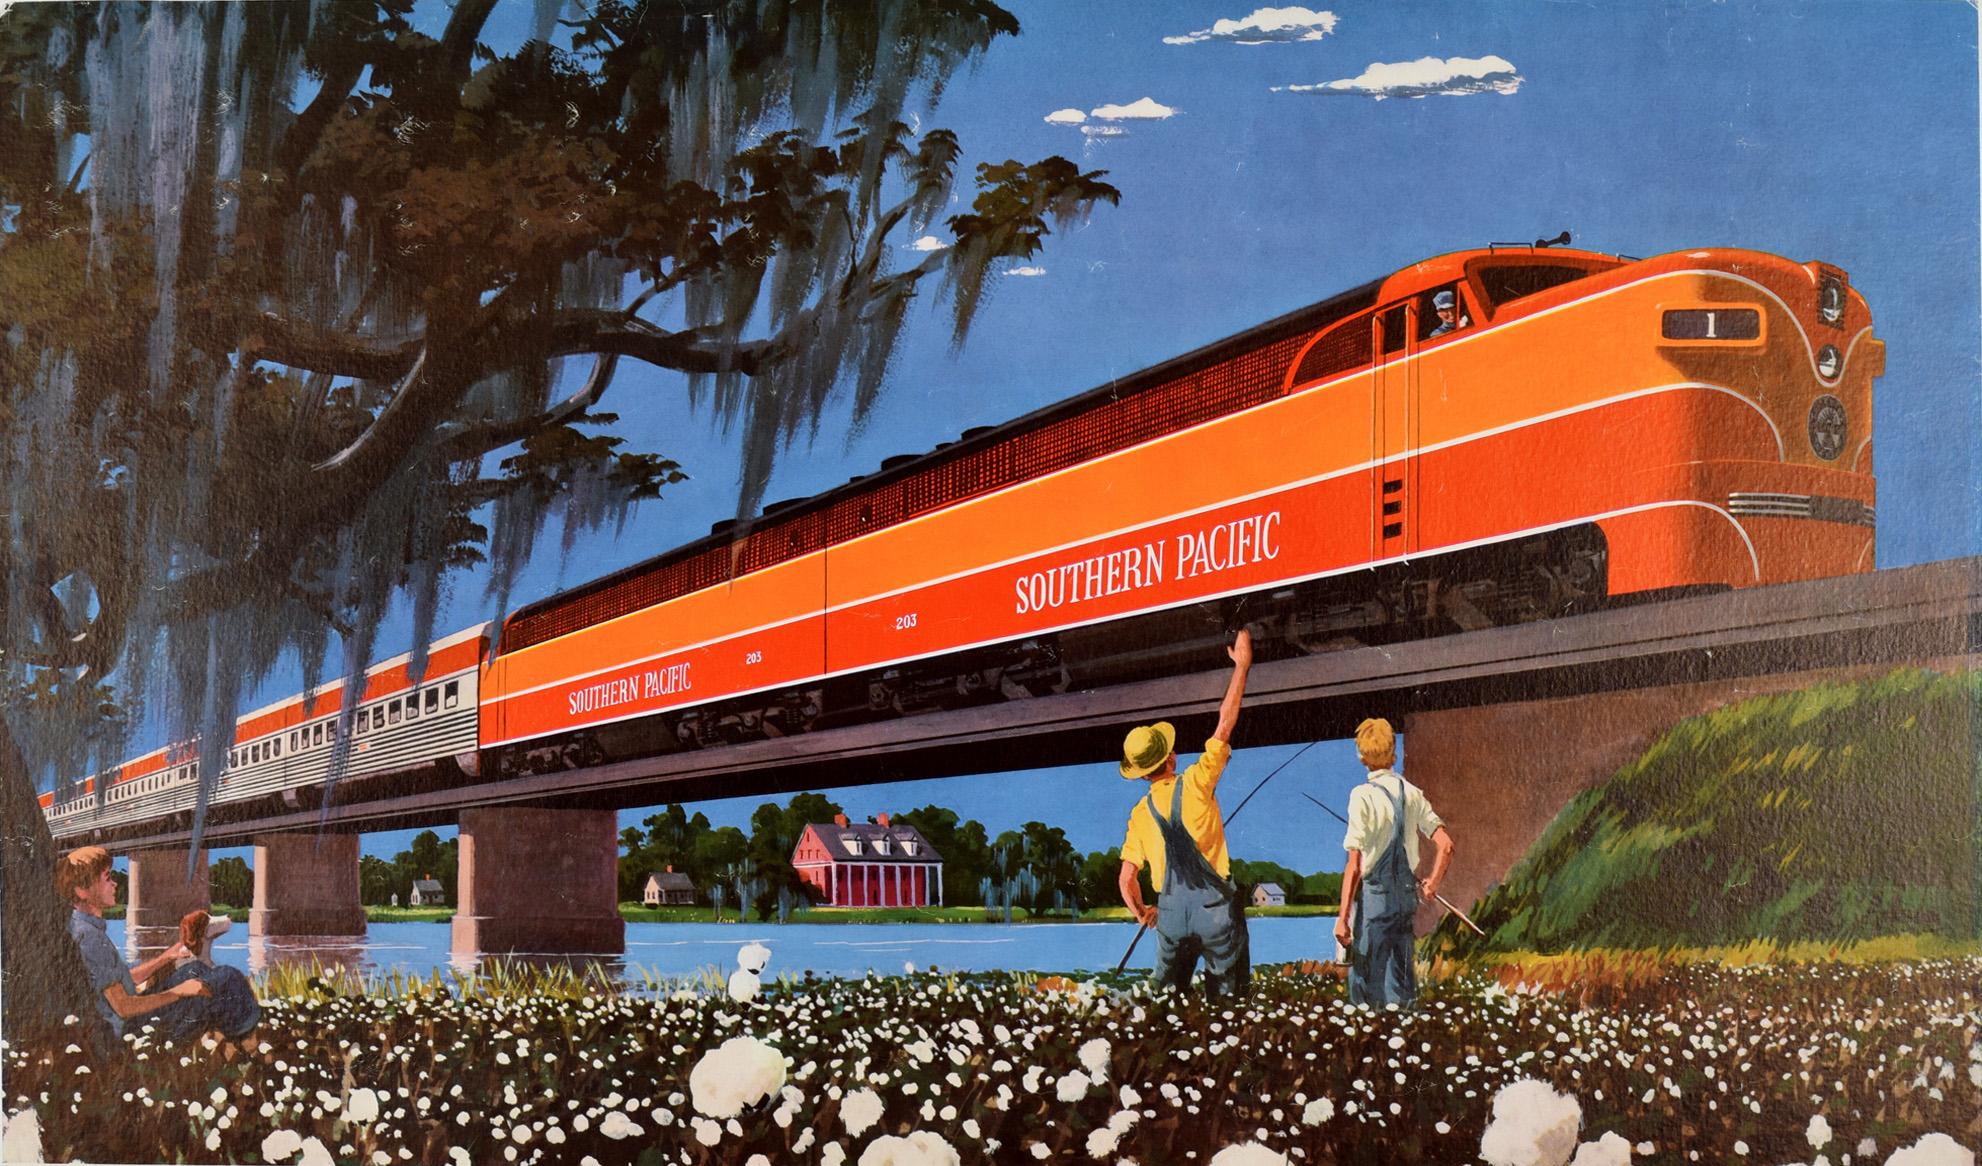 Original vintage Southern Pacific railroad poster featuring a colourful image of The Streamlined Train With The Southern Accent crossing a railway bridge over a river against the clear blue sky with two men in the foreground, one waving to the